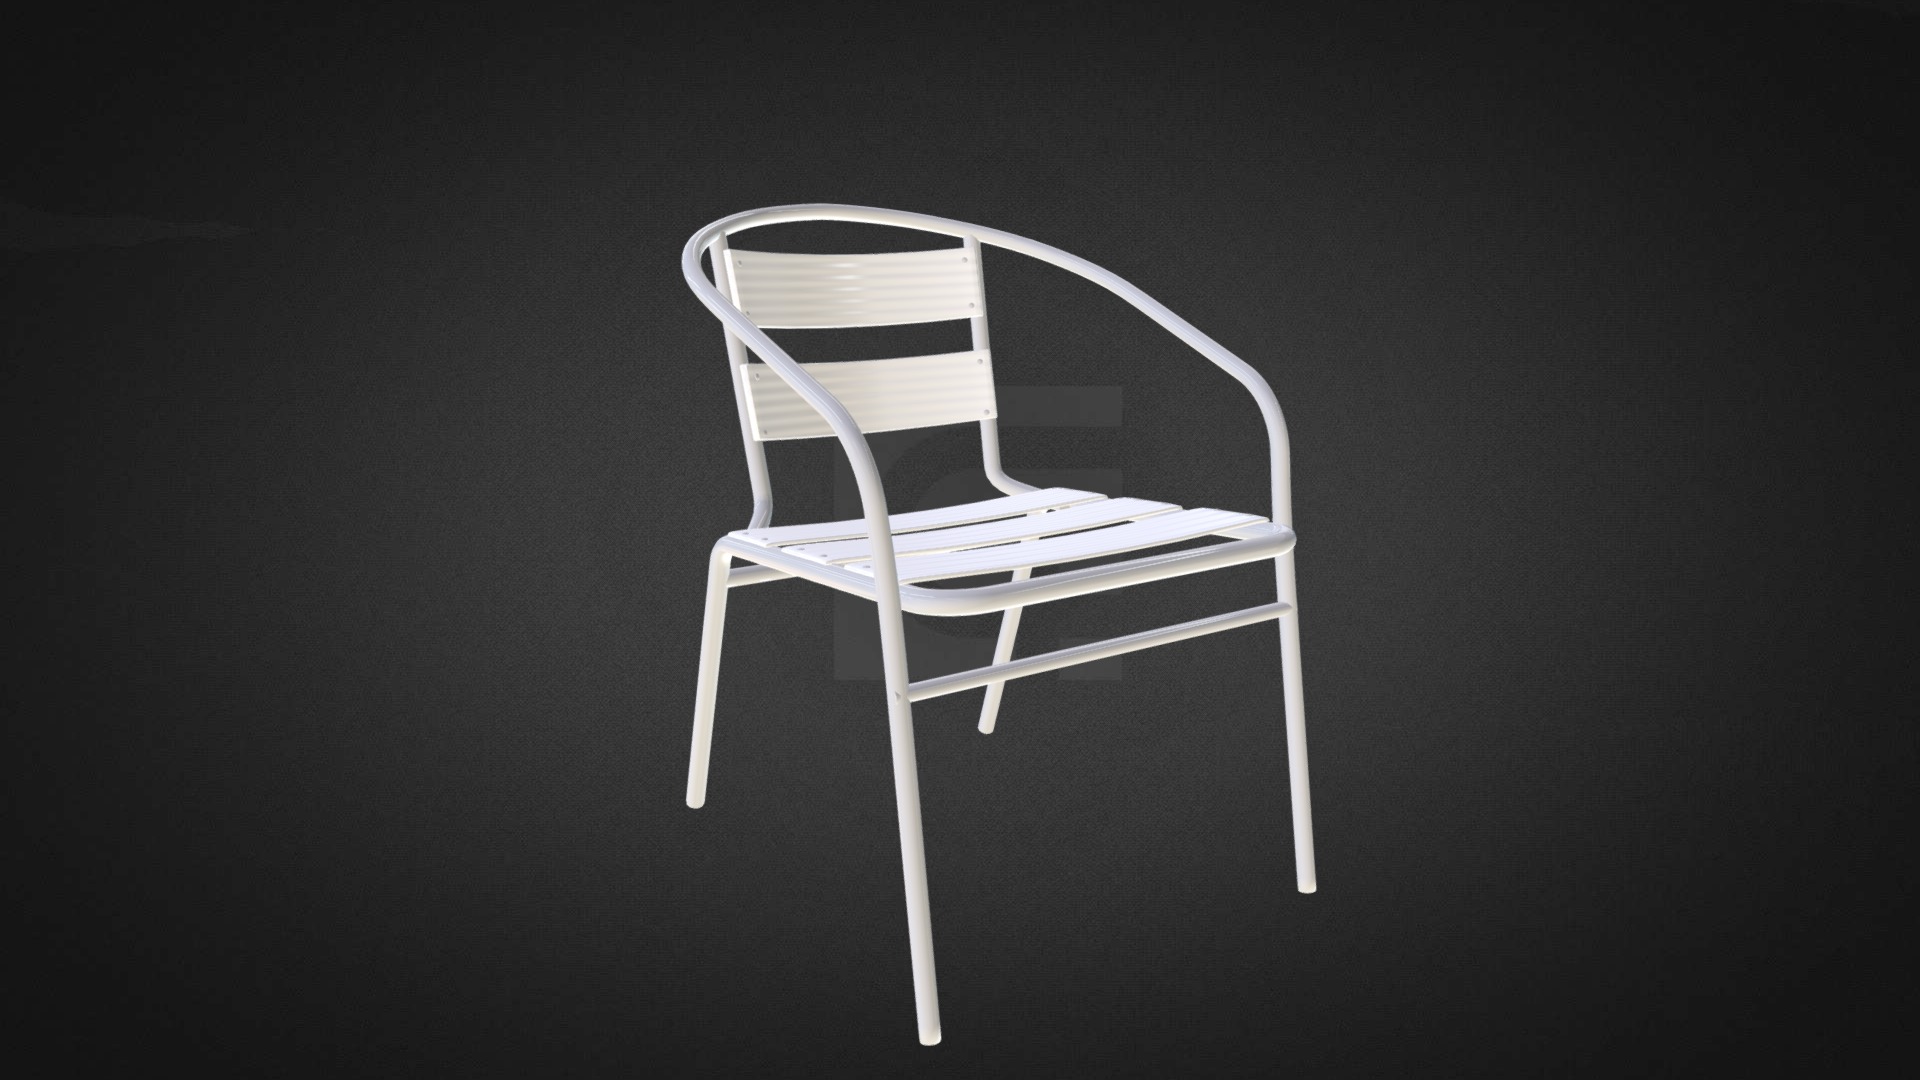 3D model Aluminium Chair Hire - This is a 3D model of the Aluminium Chair Hire. The 3D model is about a white chair with a black background.